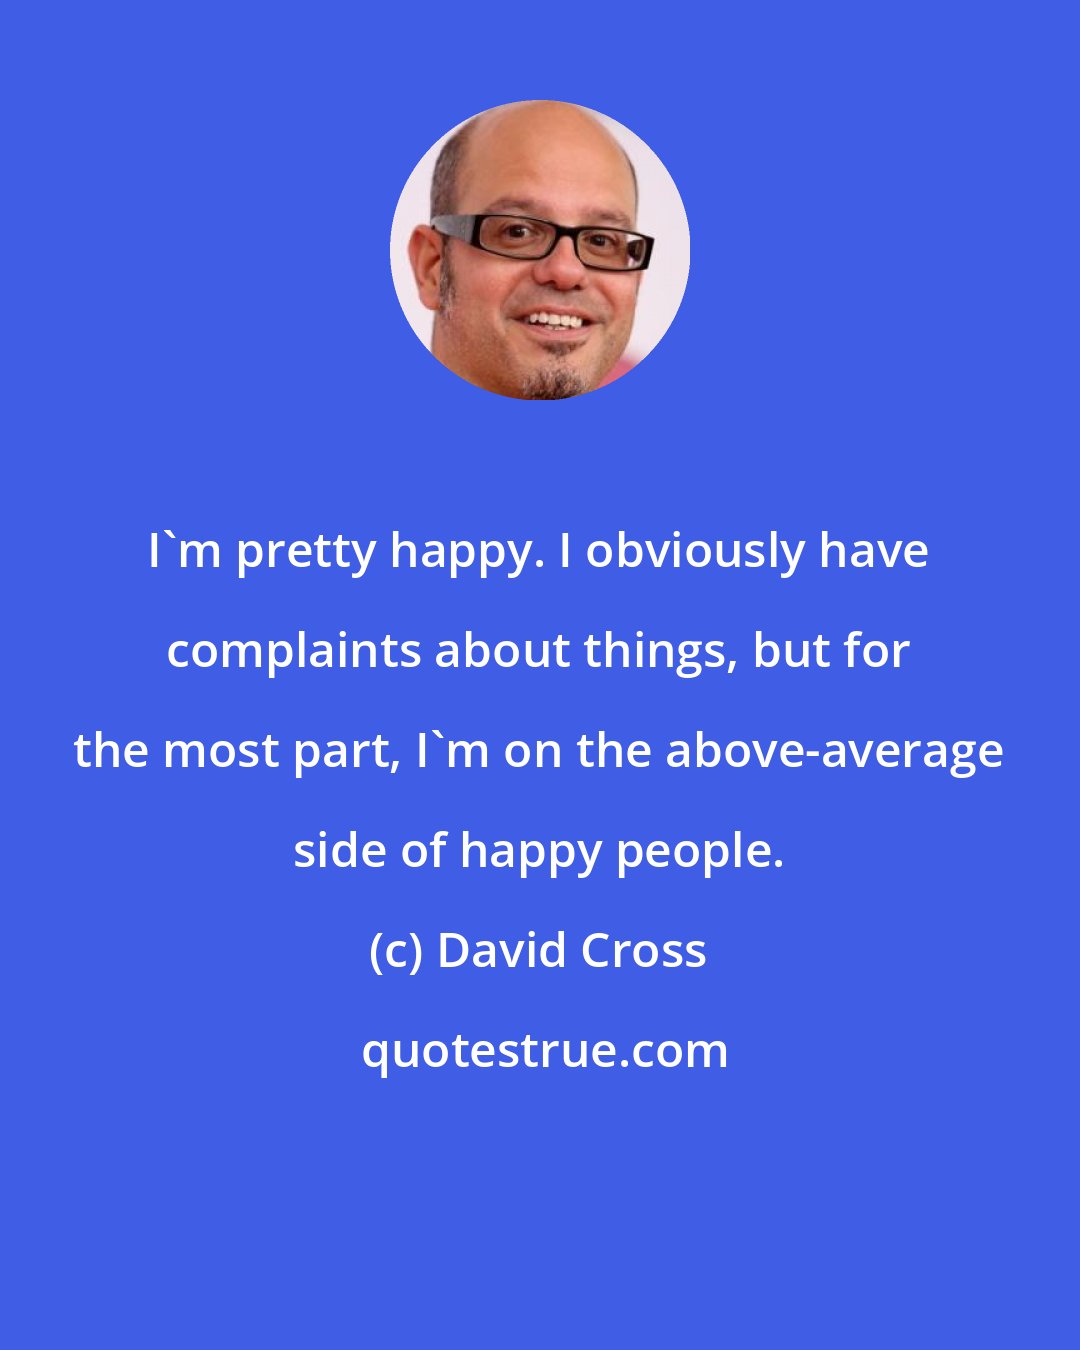 David Cross: I'm pretty happy. I obviously have complaints about things, but for the most part, I'm on the above-average side of happy people.